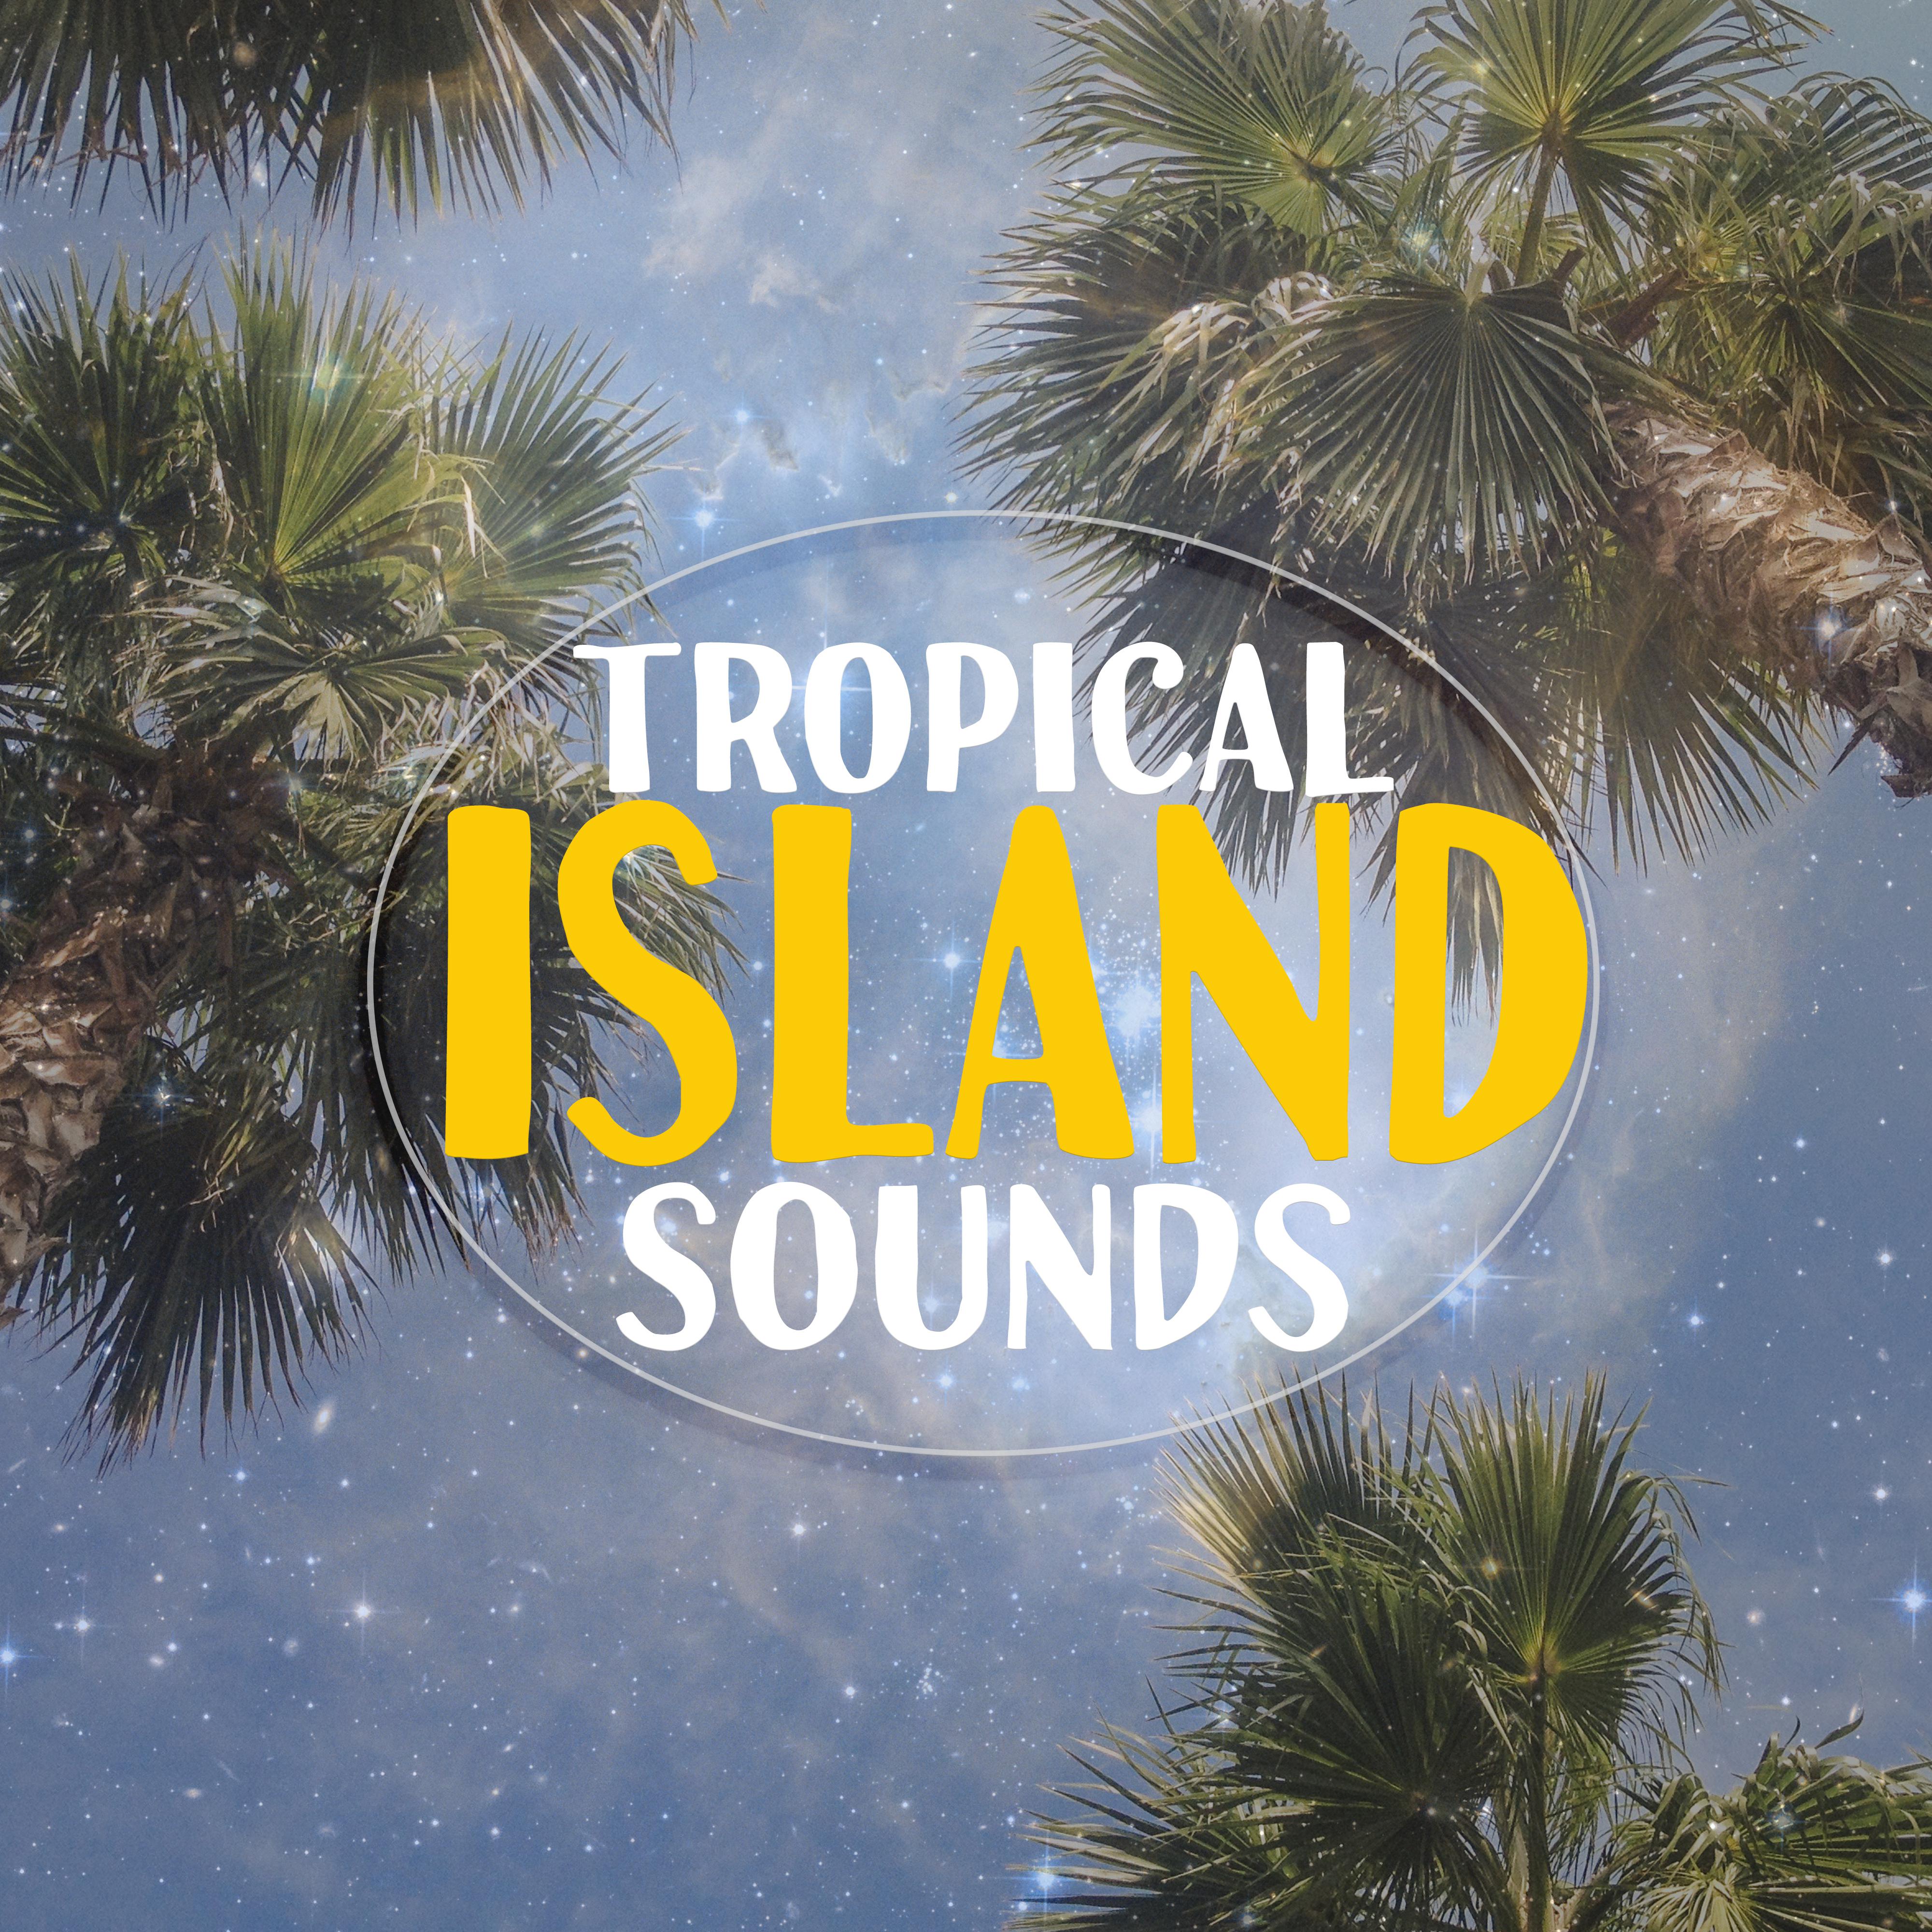 Tropical Island Sounds – Relax on the Beach, Soft Sounds to Calm Down, Ibiza Lounge, Rest Yourself